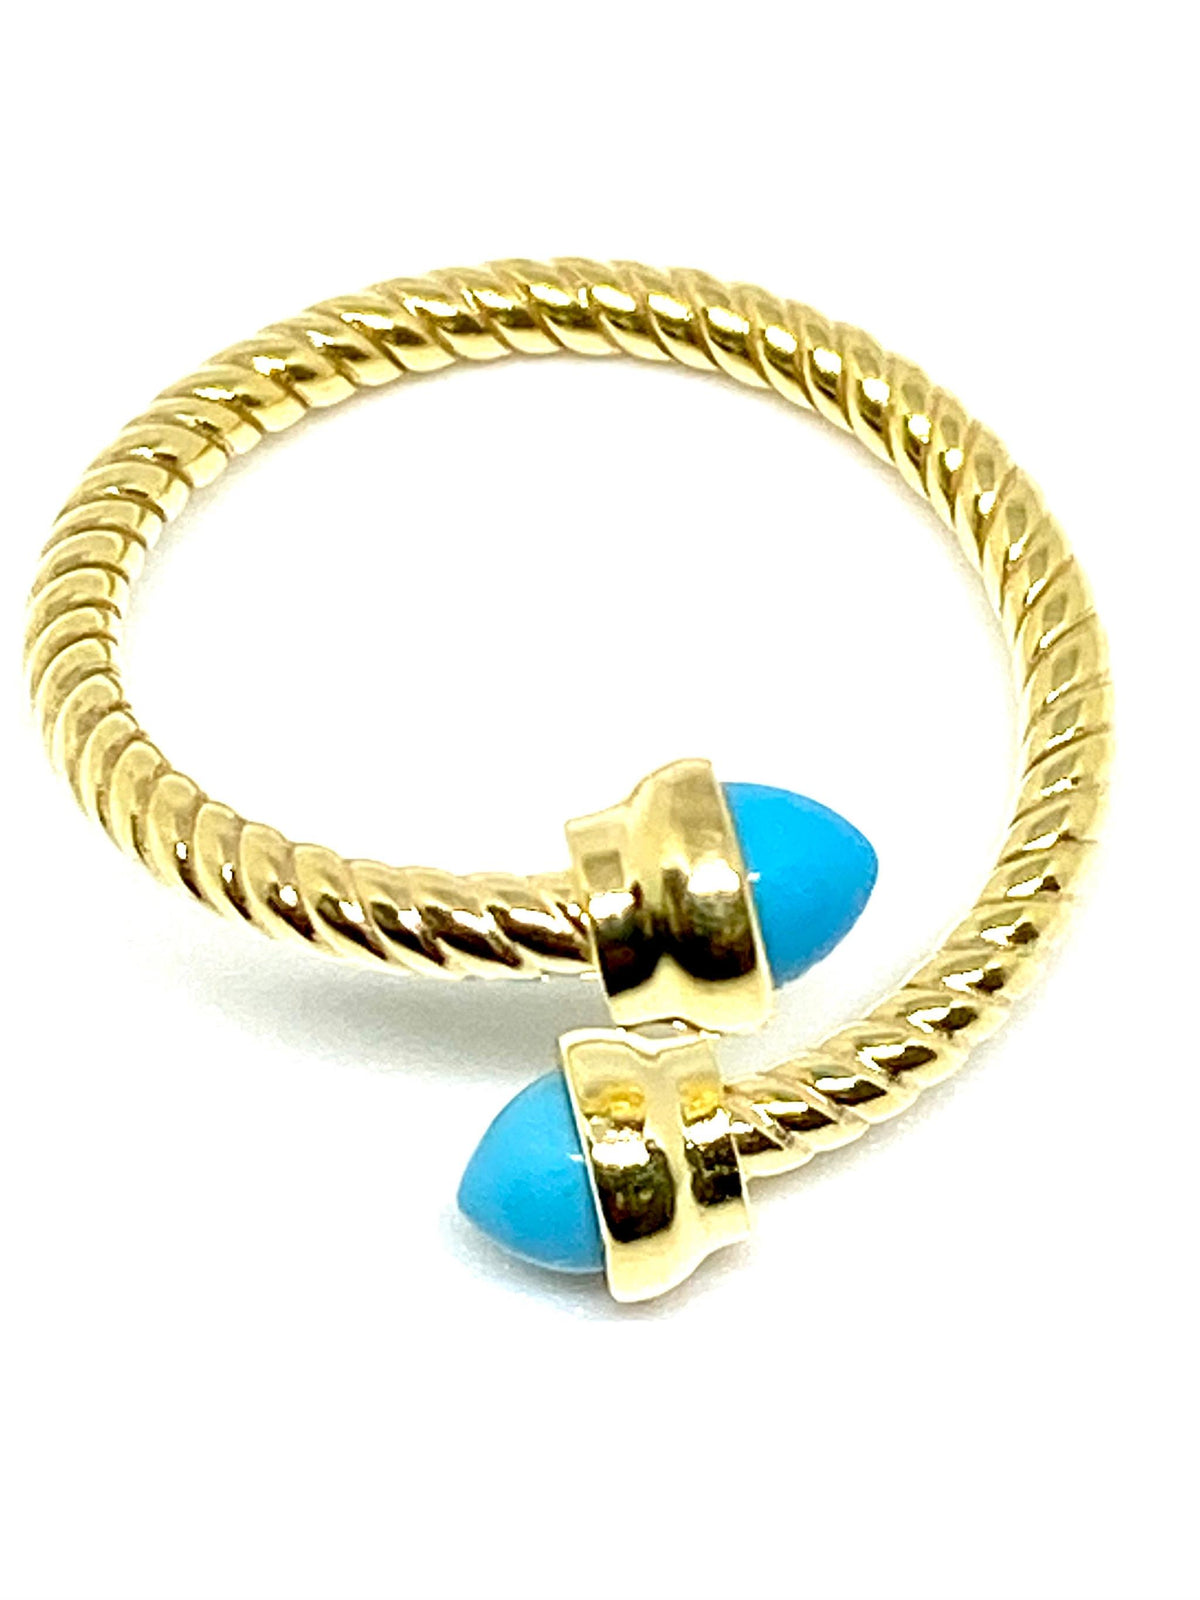 14Kt Yellow Gold Fashion Fashion Ring With Turquoise